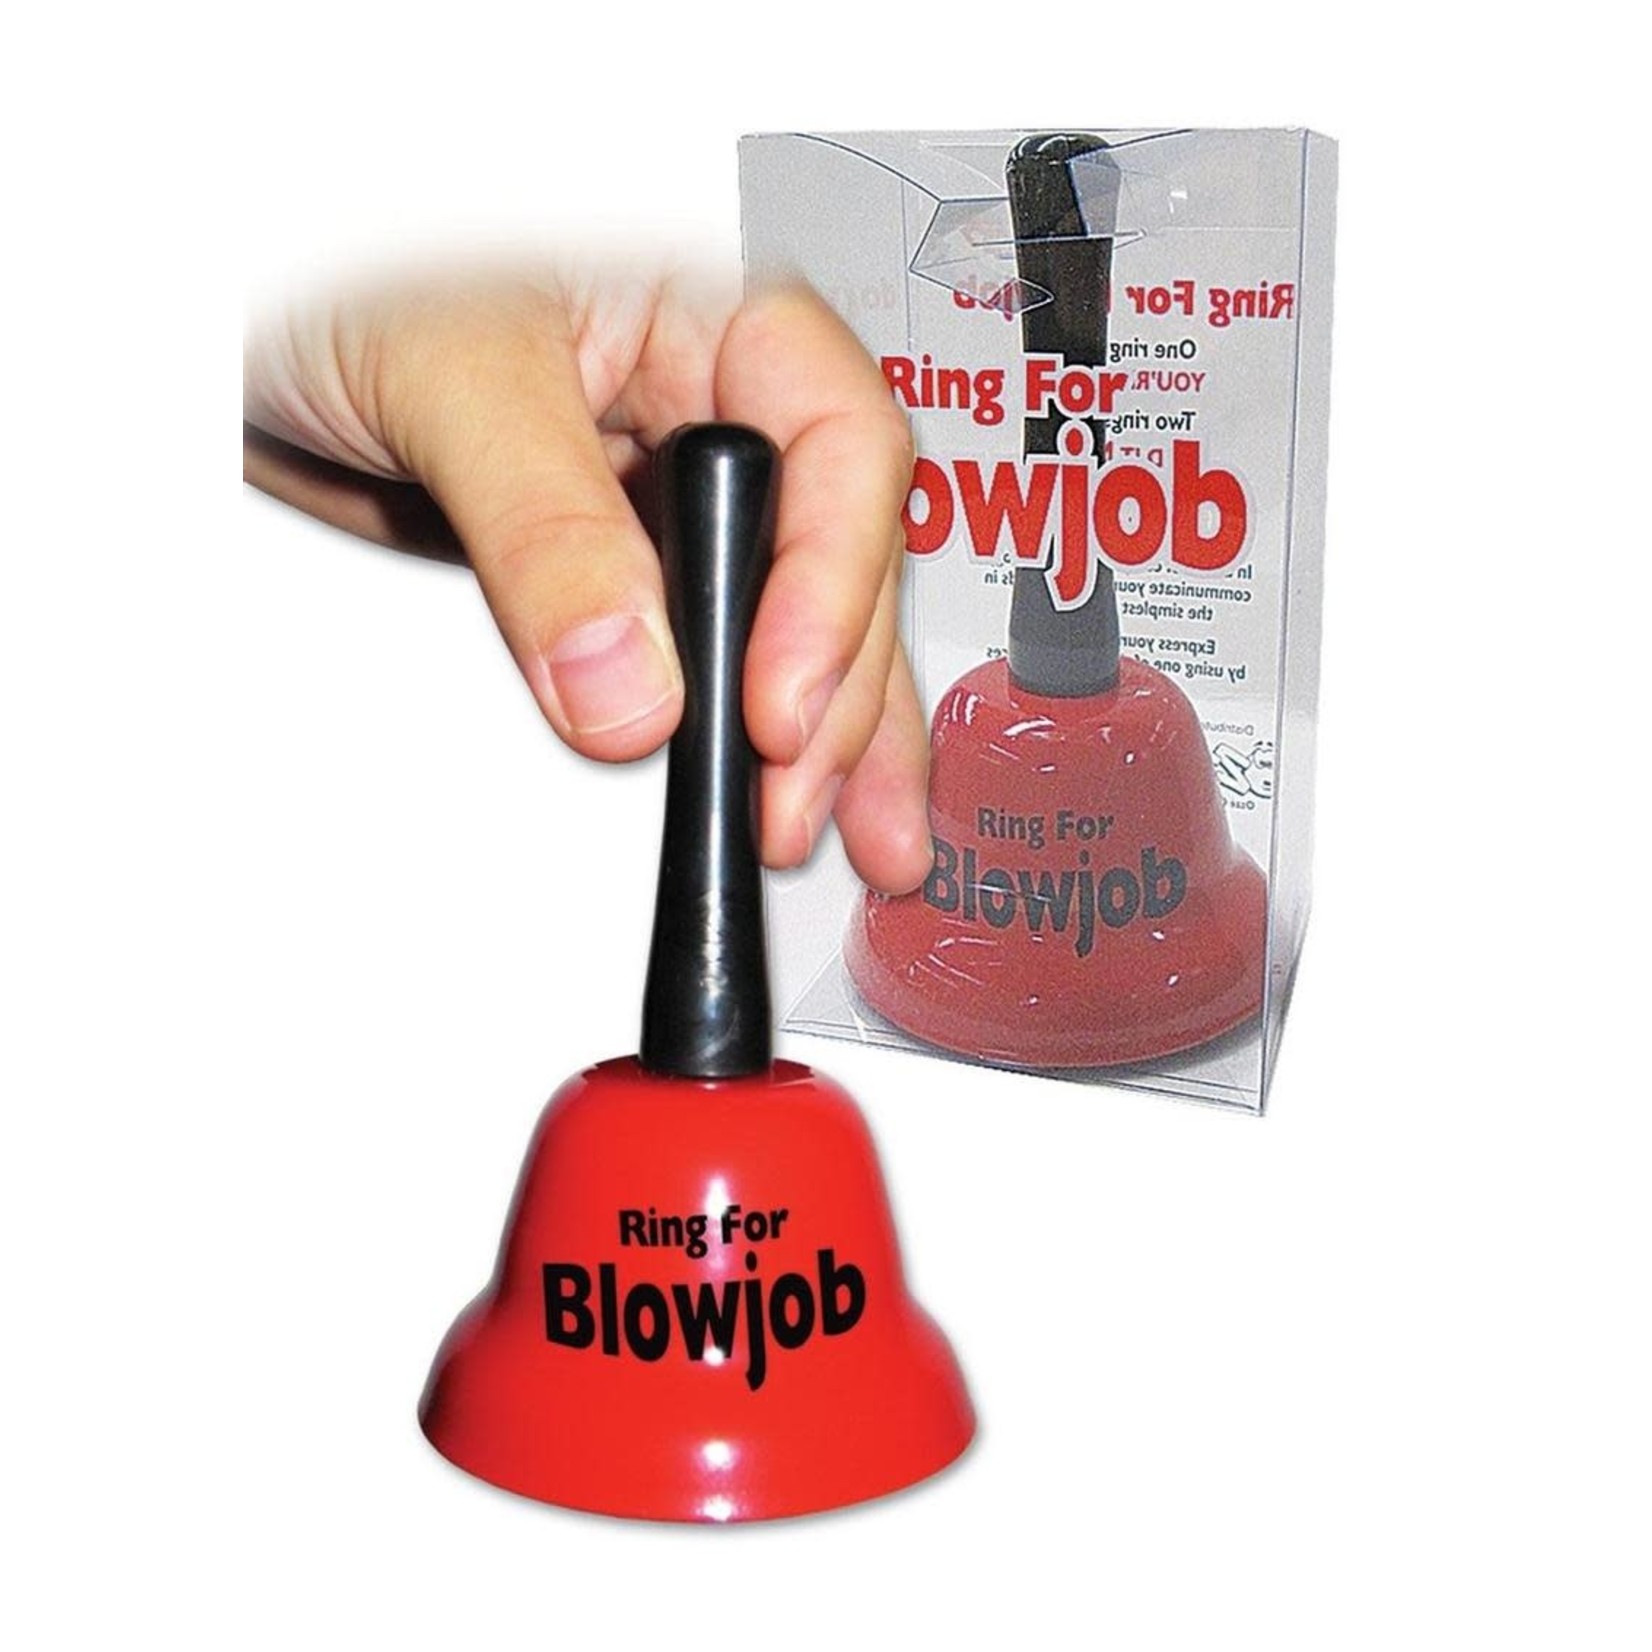 Bell "Ring For Blow Job"